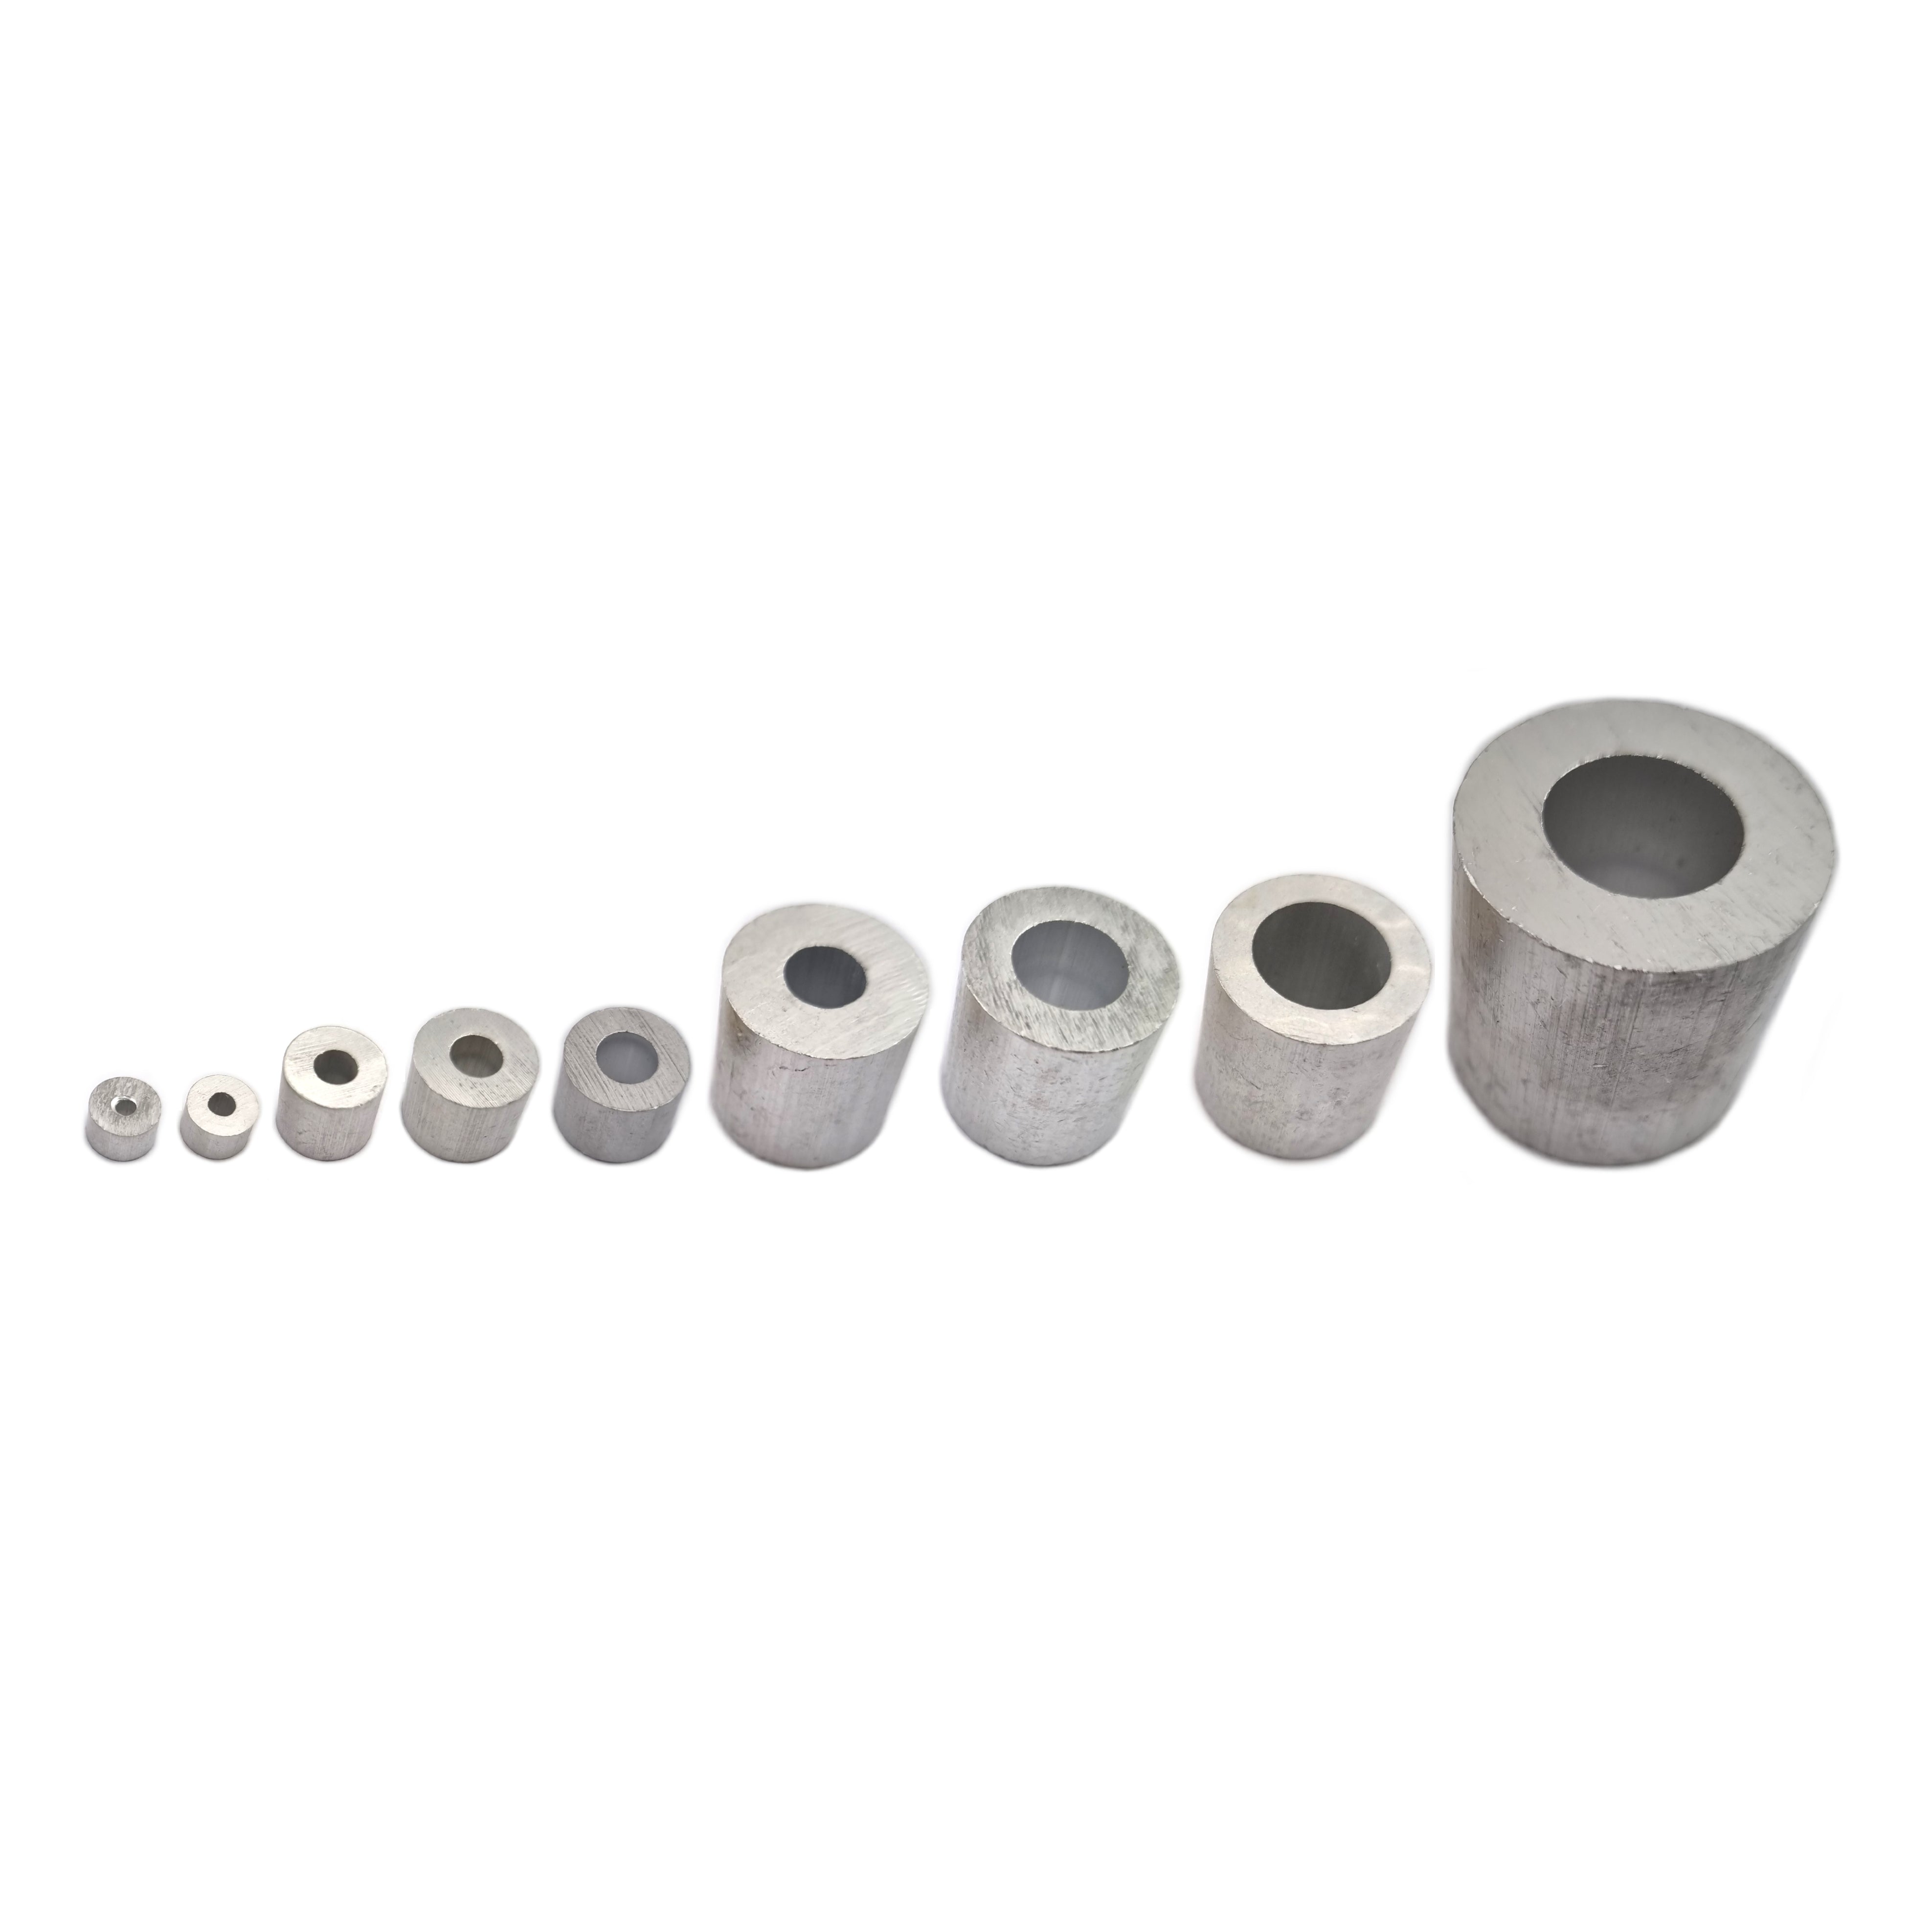 aluminium end stop. Also known as swage stop or ferrule stop. Shop balustrade & hardware chain.com.au